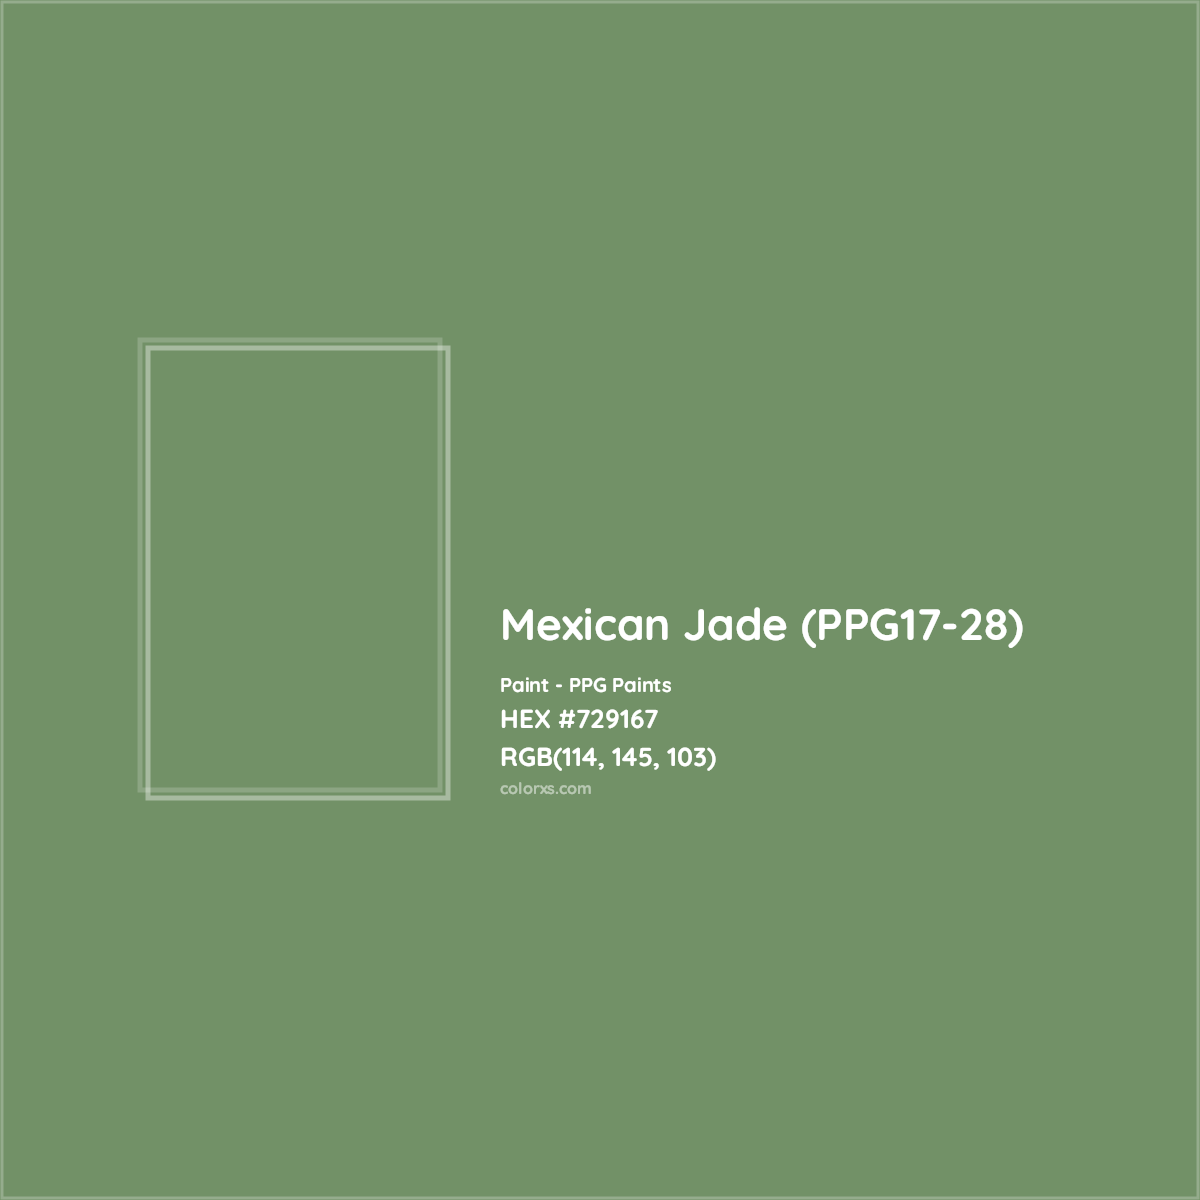 HEX #729167 Mexican Jade (PPG17-28) Paint PPG Paints - Color Code